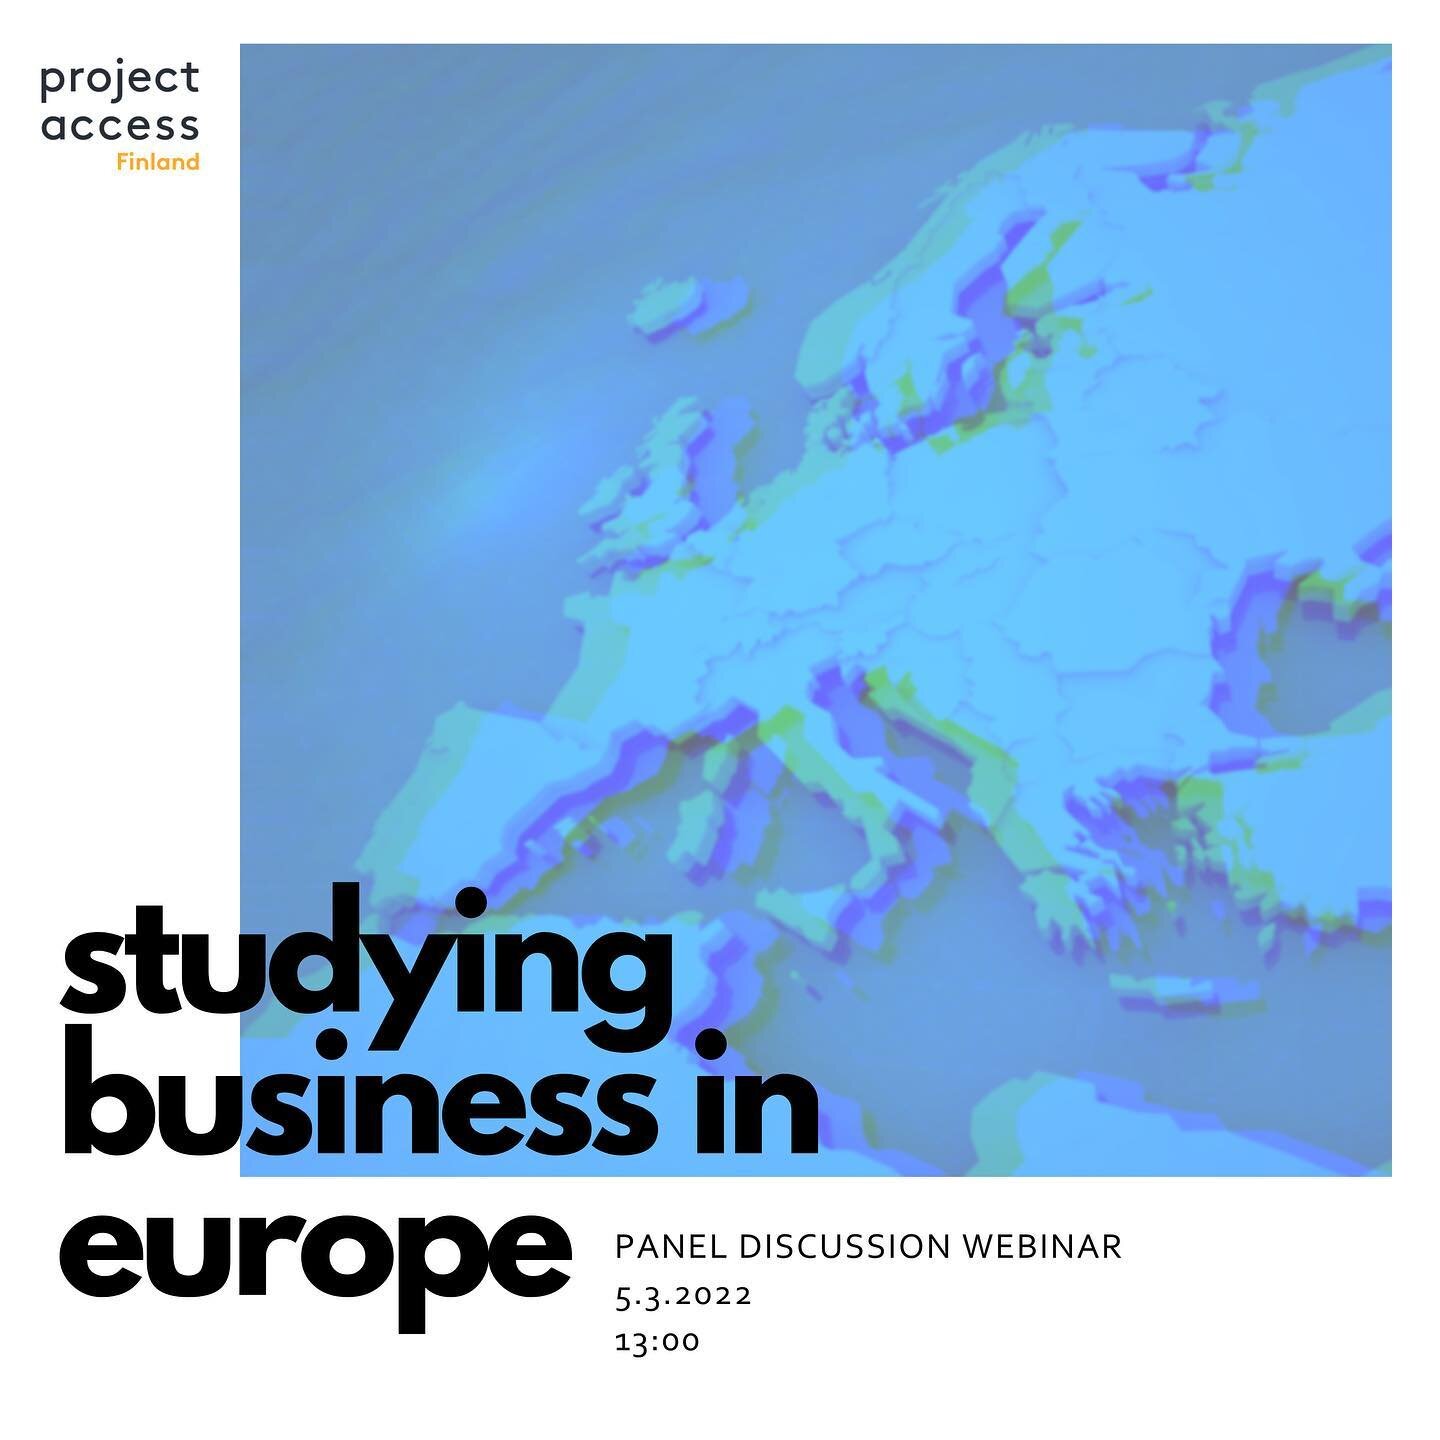 Are you interested in studying Business/Economics in Europe?📈📊

Sign up for our panel discussion webinar through the link in our bio!

This Saturday 13-14 Finnish time.

#university #yliopisto #yliopistohaku #ylioppilas #opiskelu #opiskelupaikka #o